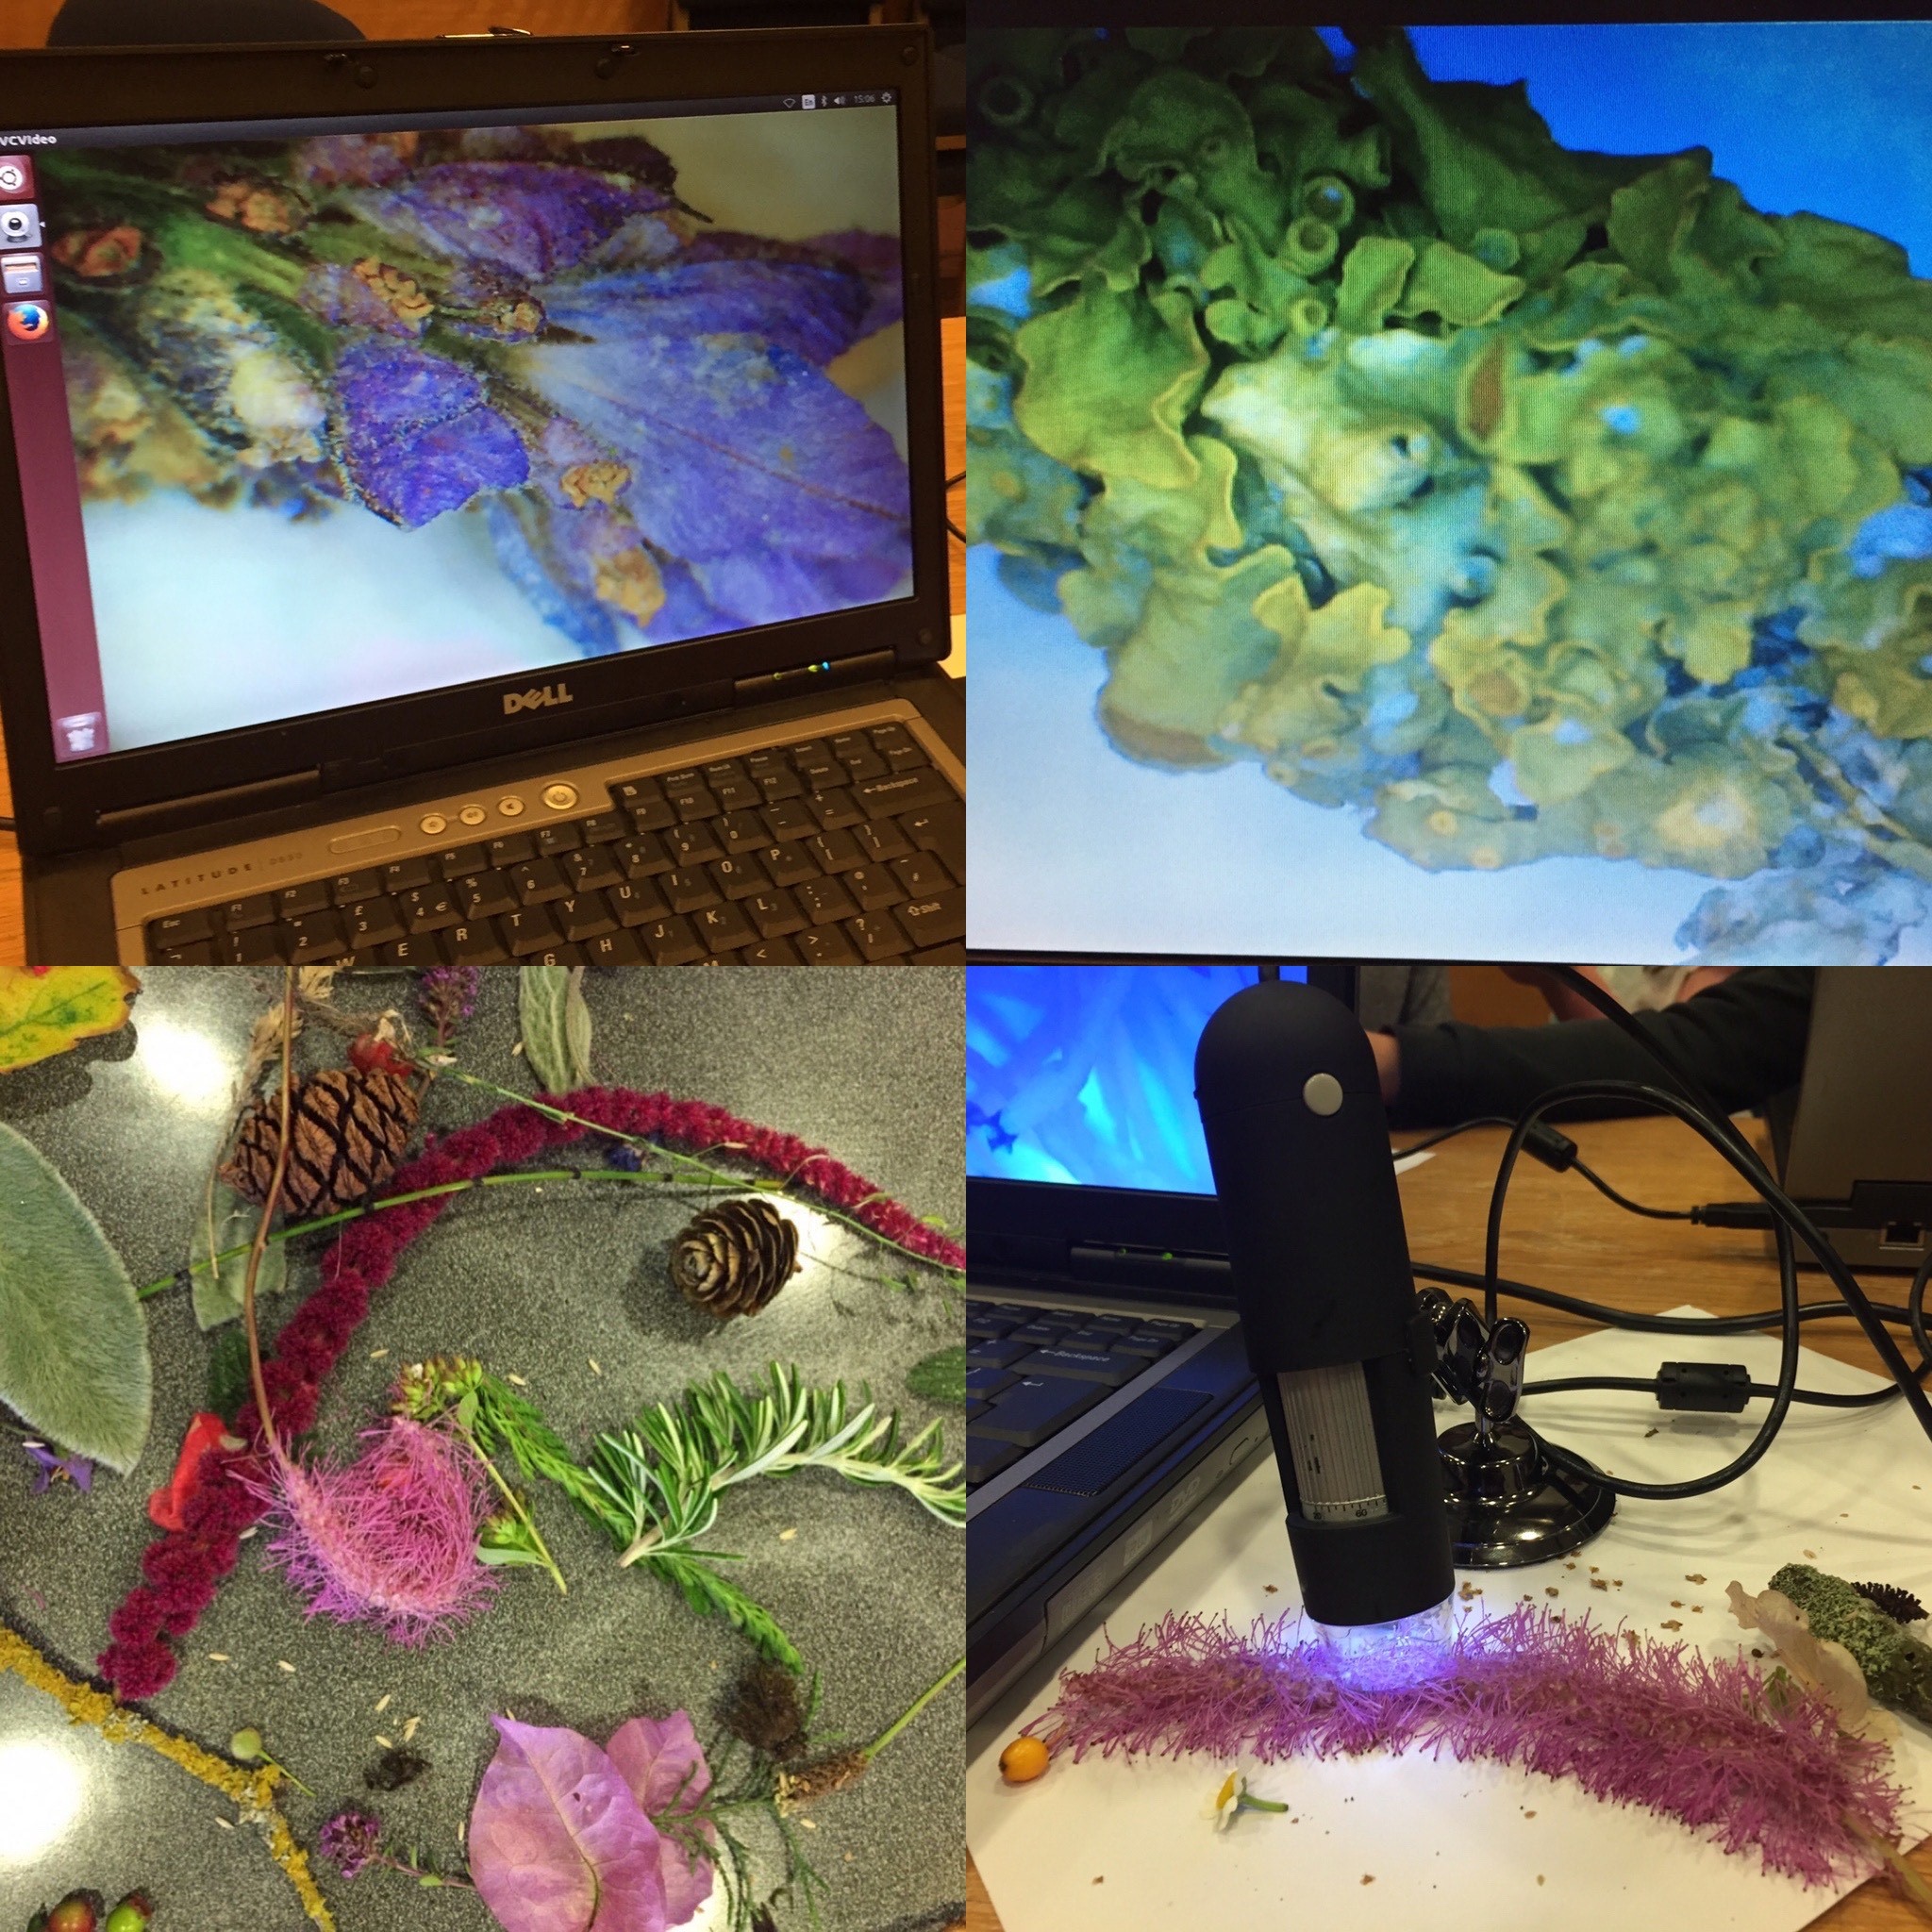 Four images. One of a close up of a purple plant on a computer screen, the next another close up of yellow lichen. The next image is pine caones, rosemary sprigs, salvia leaves and other plant material, while the last image is a microscope shining onto a bright pink sanguisorba